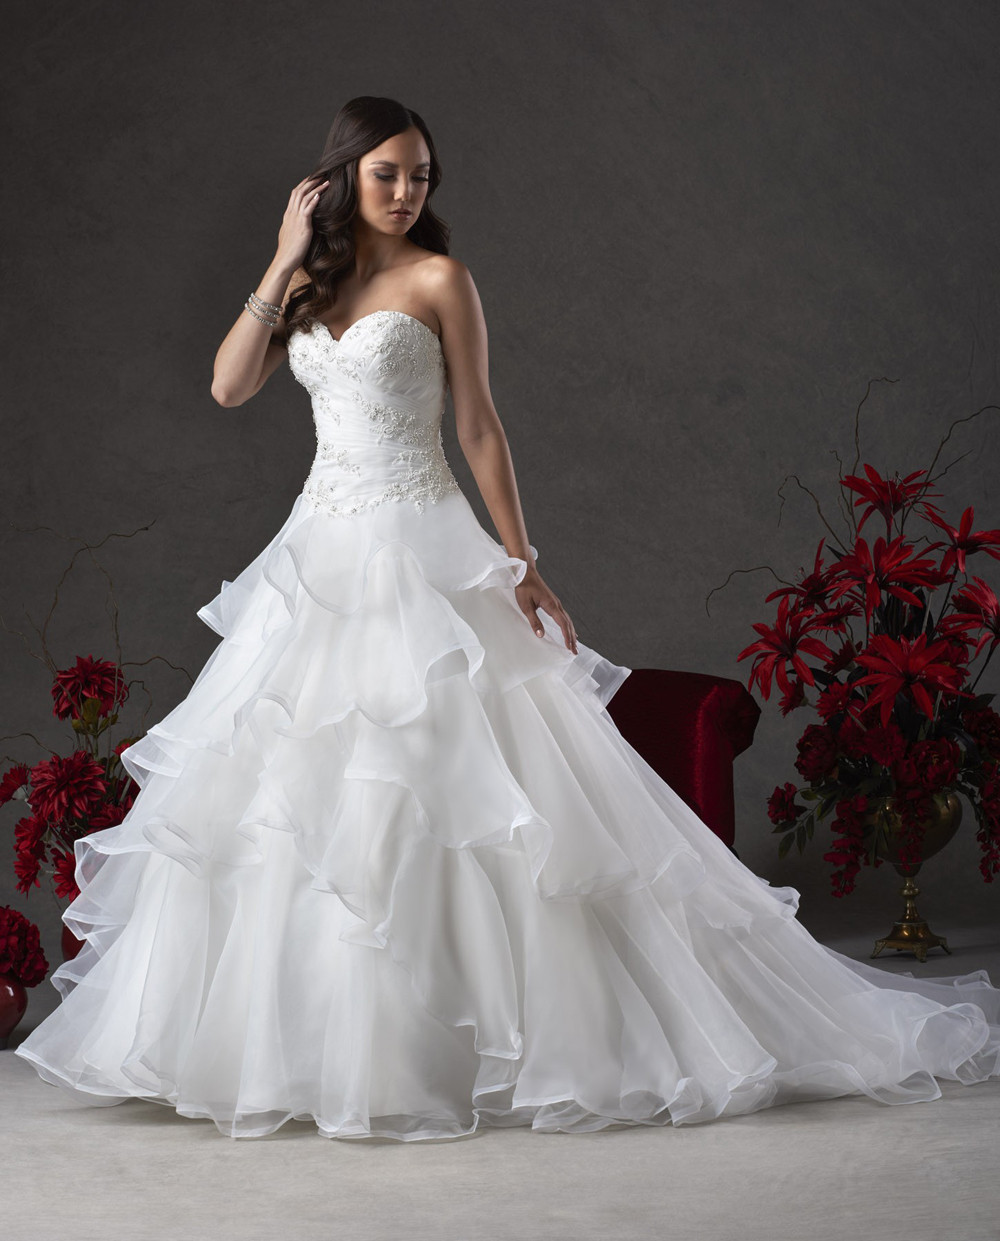 Tiered Wedding Dress
 New Tiered Appliques Wedding Dress Elegant Sweetheart Lace